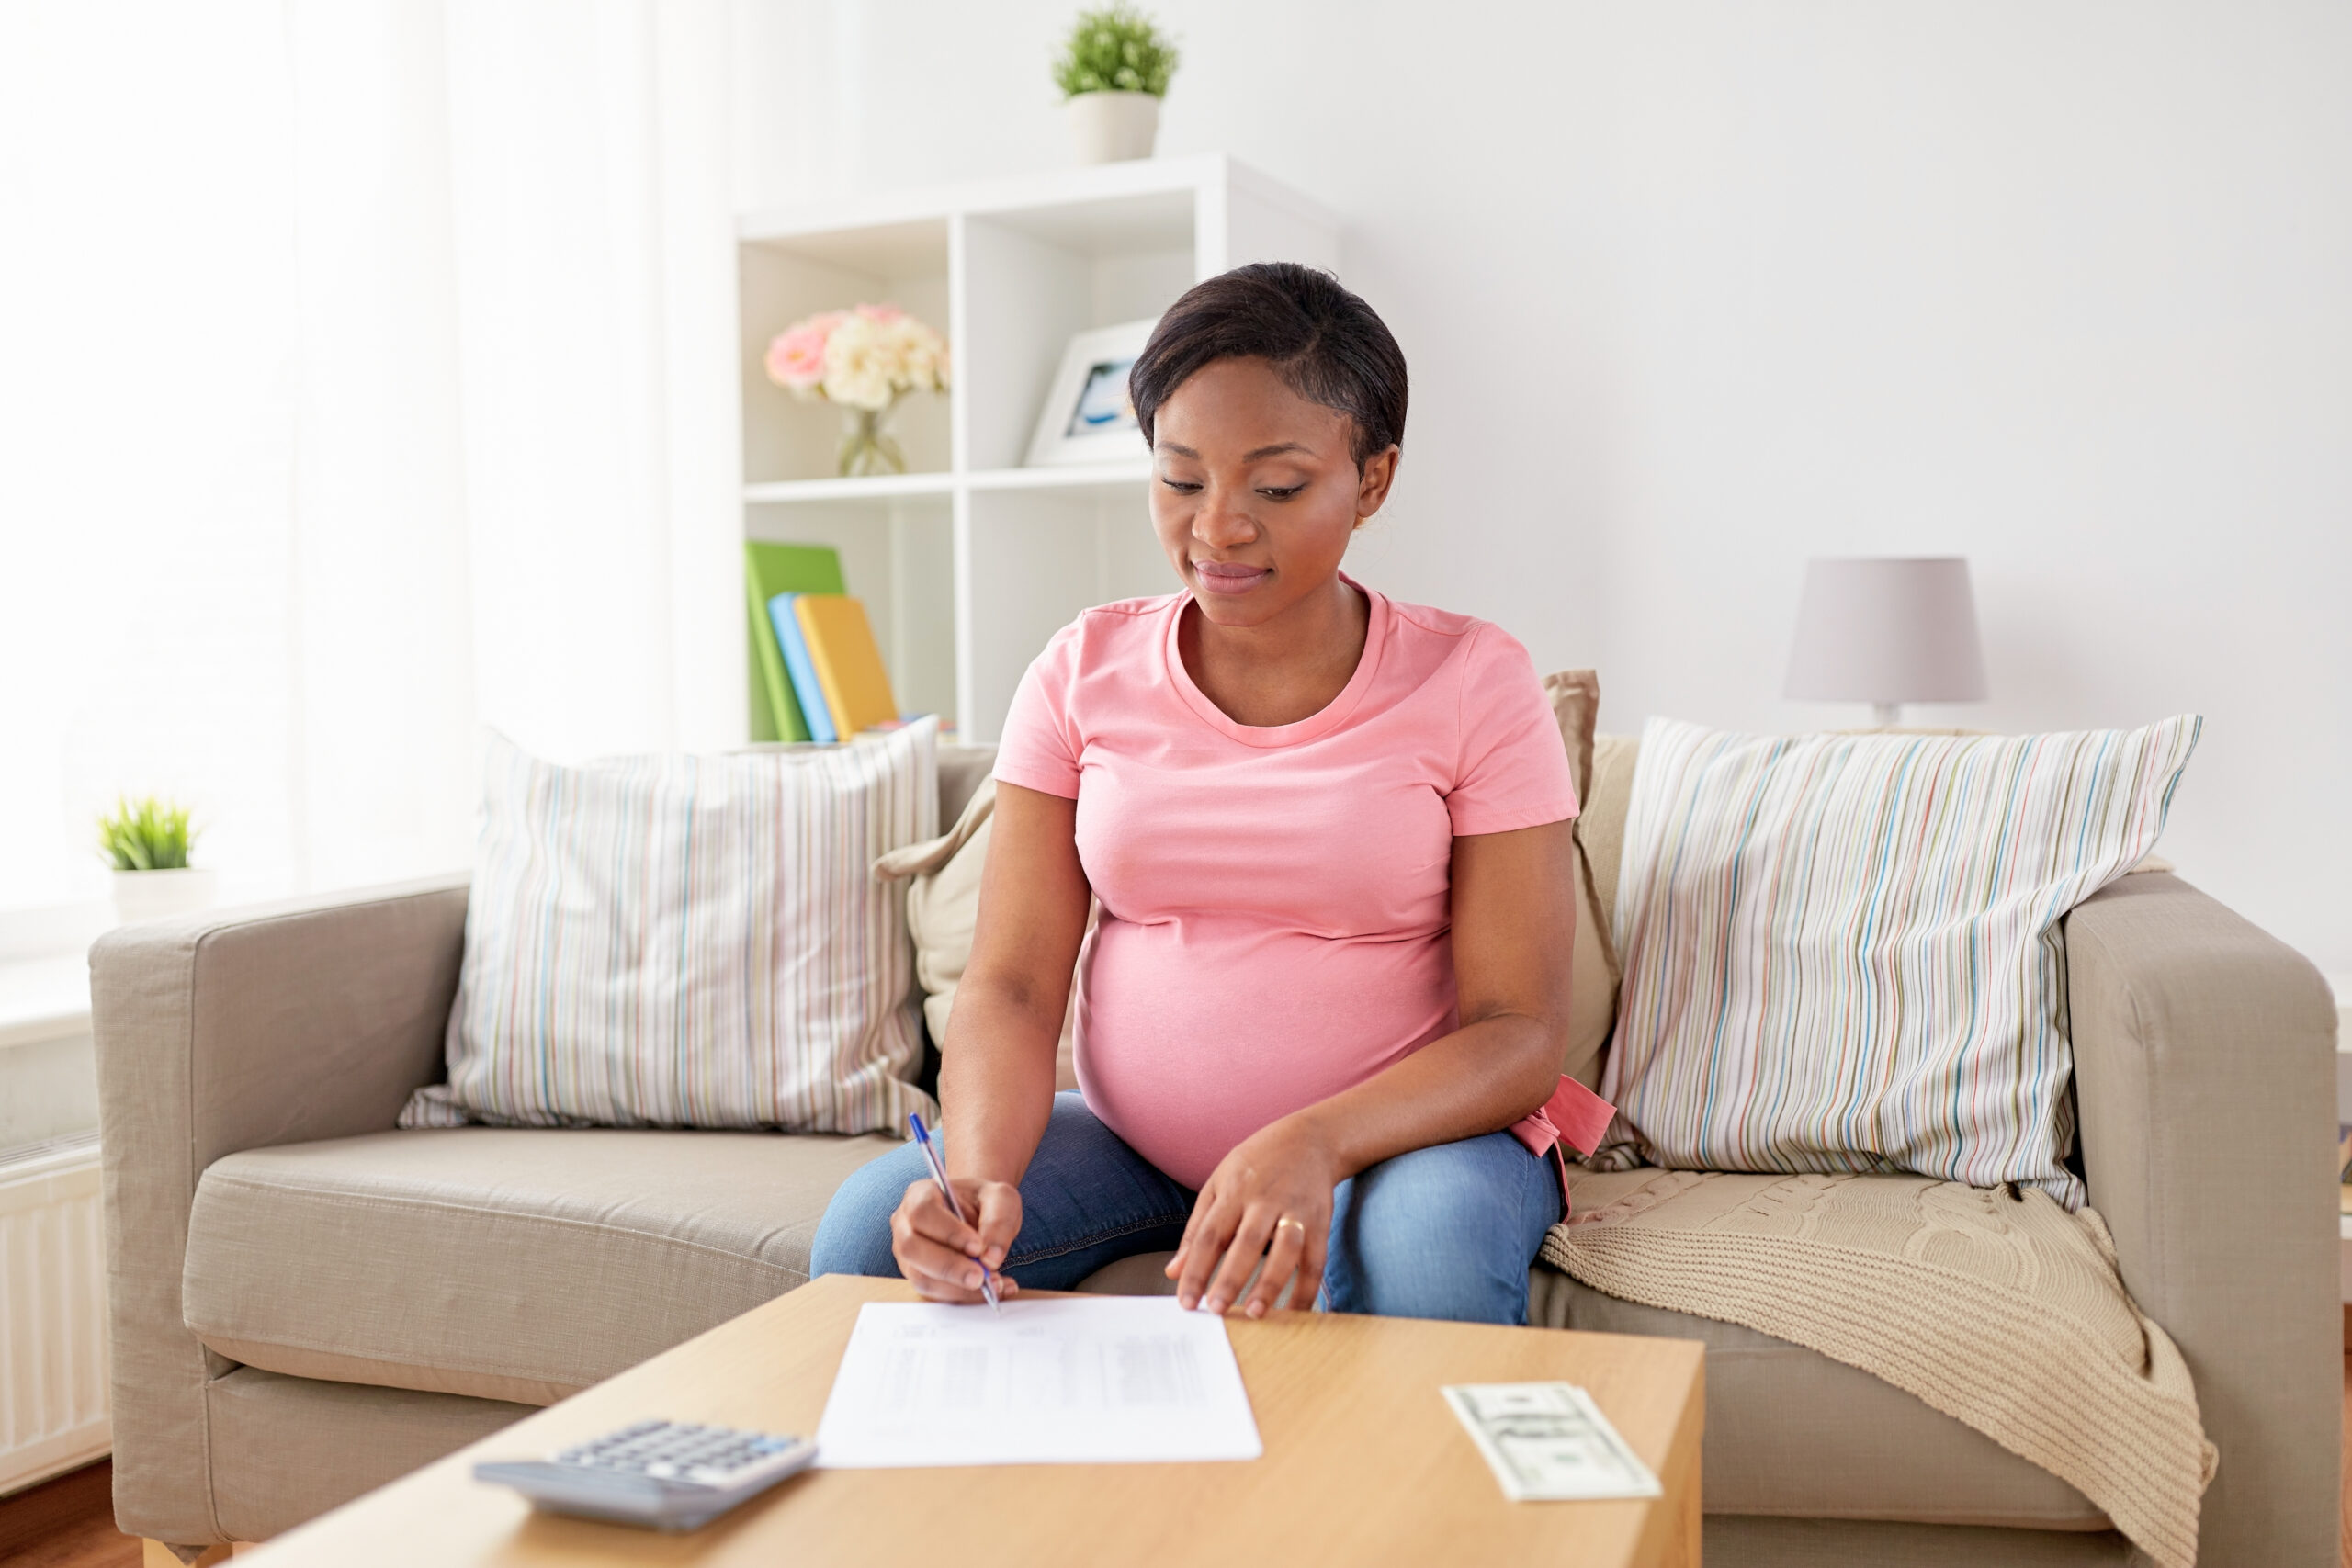 a pregnant woman sits on her couch working on her taxes with a calculator in front of her.